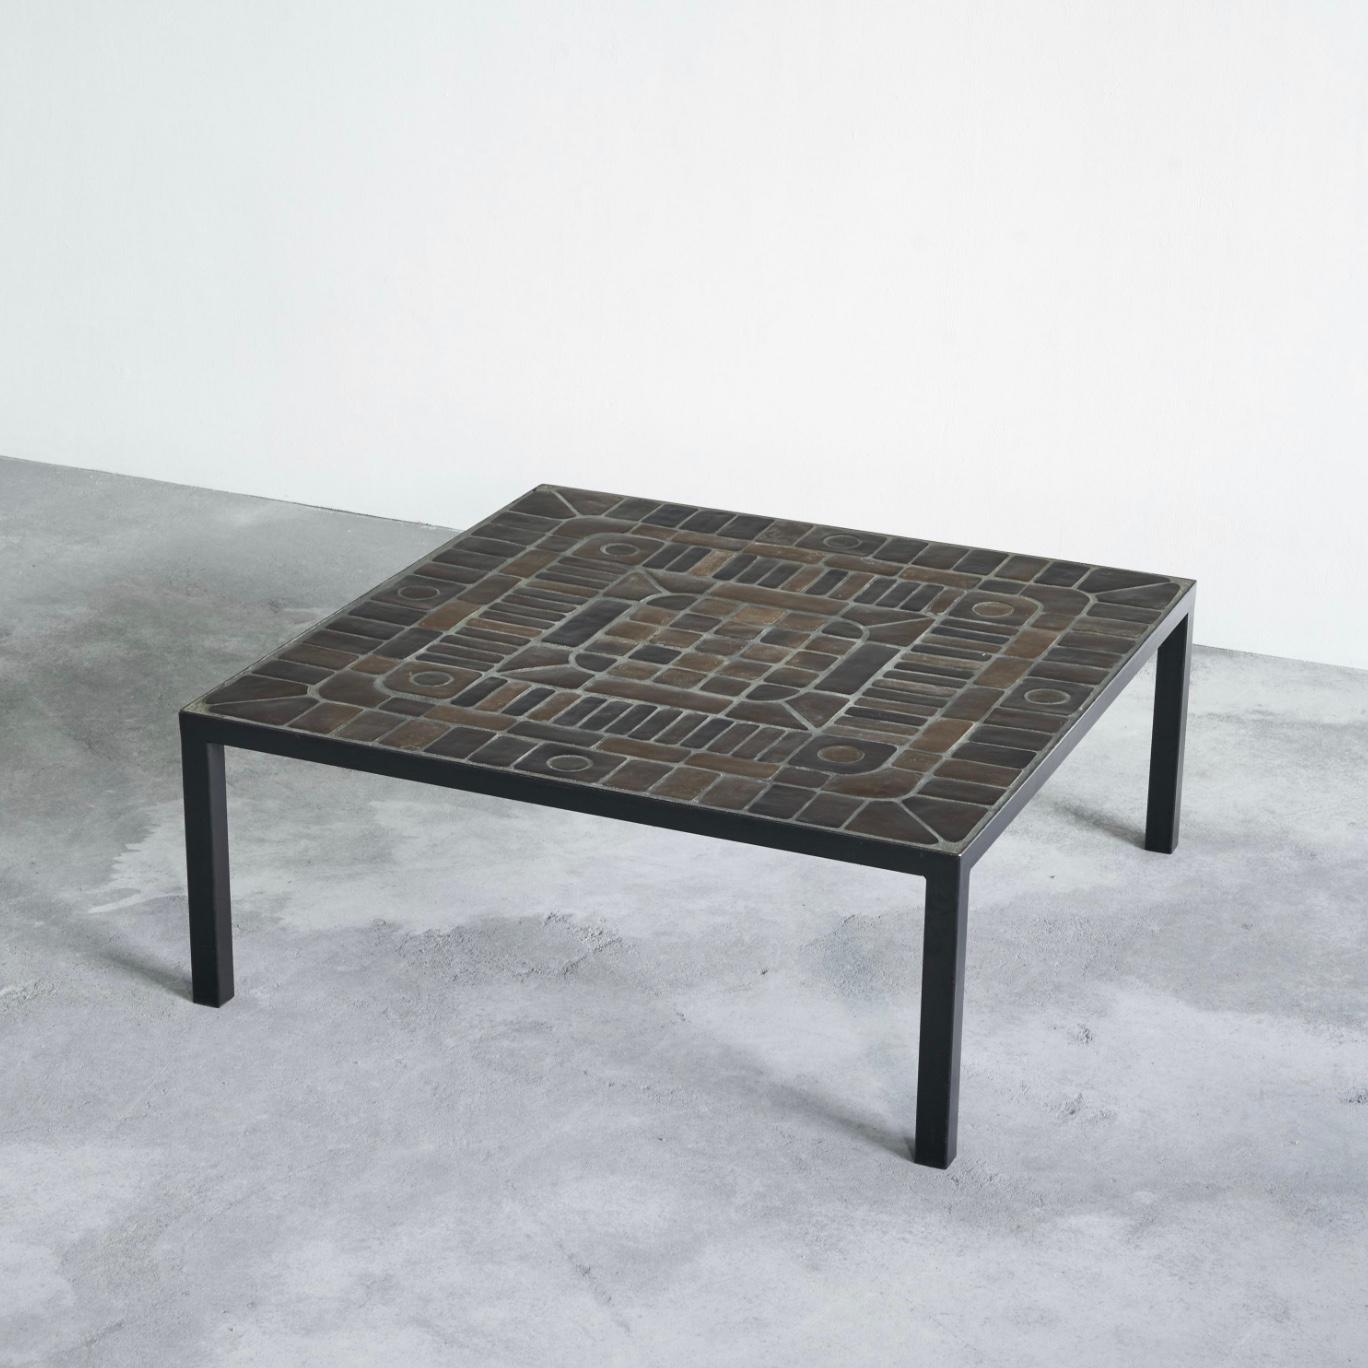 20th Century Hand Made Coffee Table in Metal and Ceramic Tiles Belgium 1960s For Sale